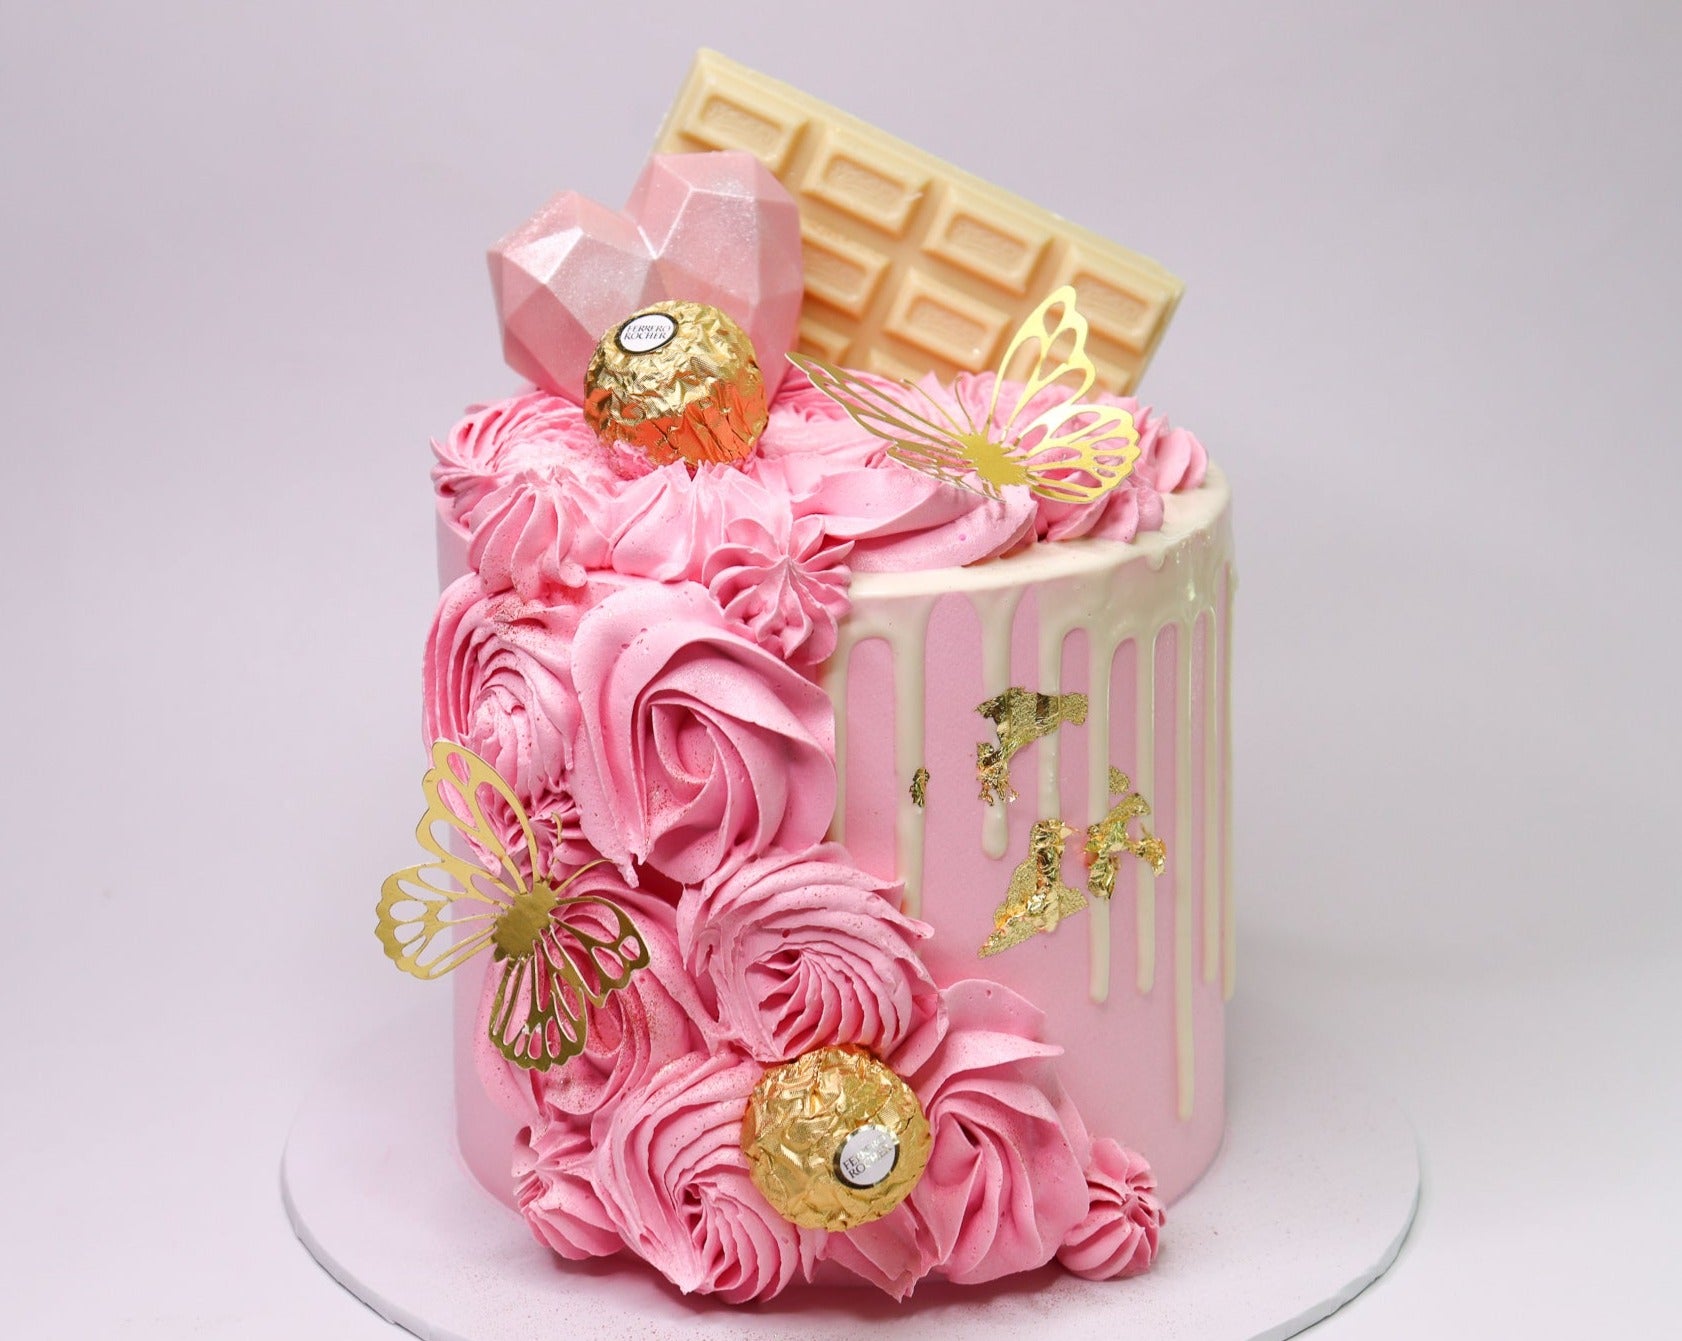 Premium Cakes Archives - Page 3 of 7 - Kidd's Cakes & Bakery